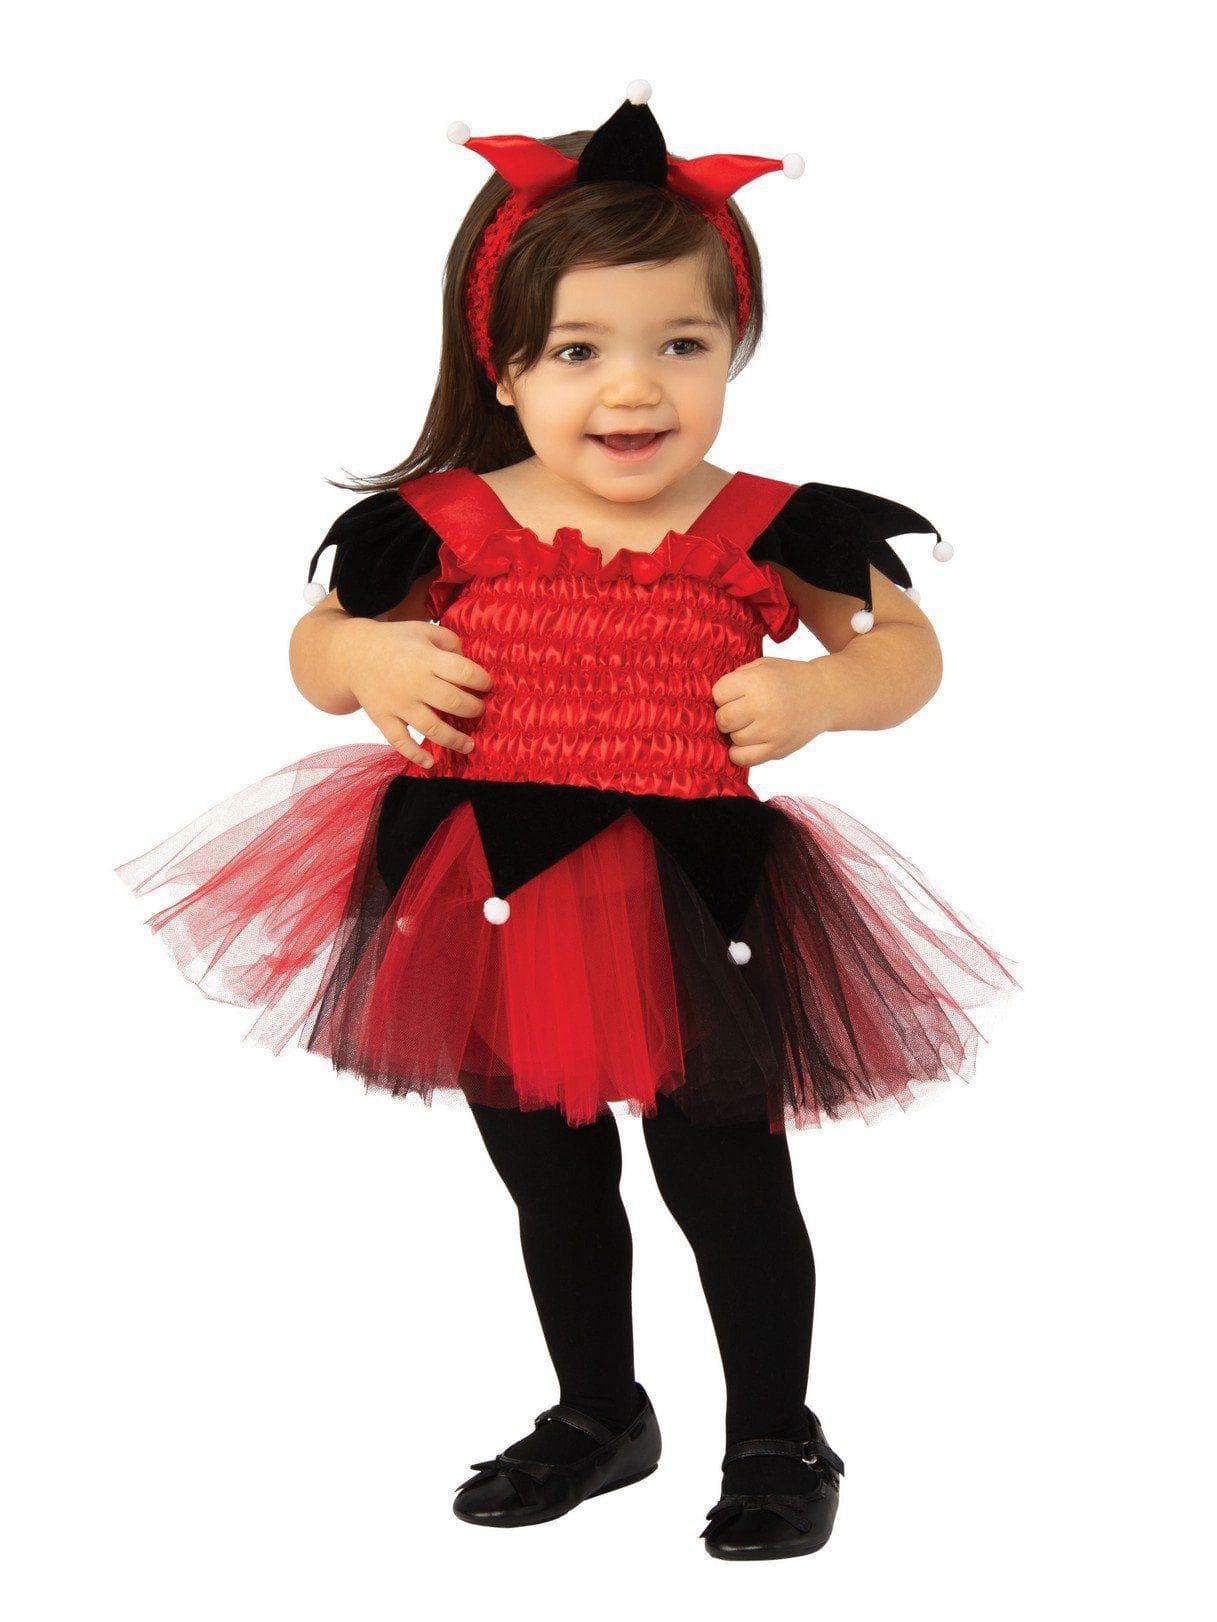 Baby/Toddler Court Jester Costume - costumes.com